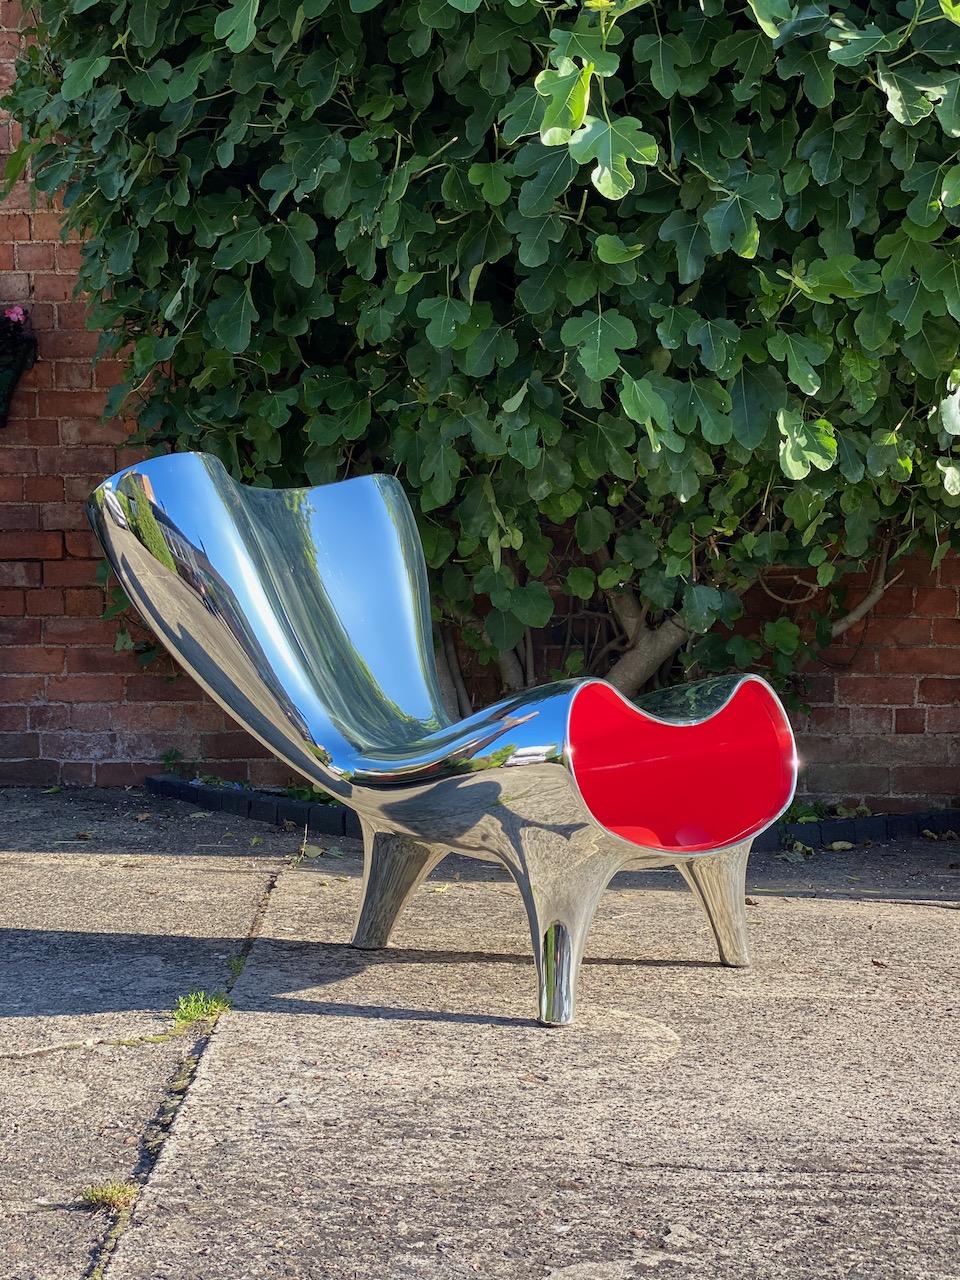 Marc Newson lockheed style chrome Orgone chair circa 1993 

Stunning Chrome finish Orgone chair after the original Lockheed design by Marc Newson circa 1993 finished in chrome ceramic paint with candy apple red guts, the Orgone chair was designed